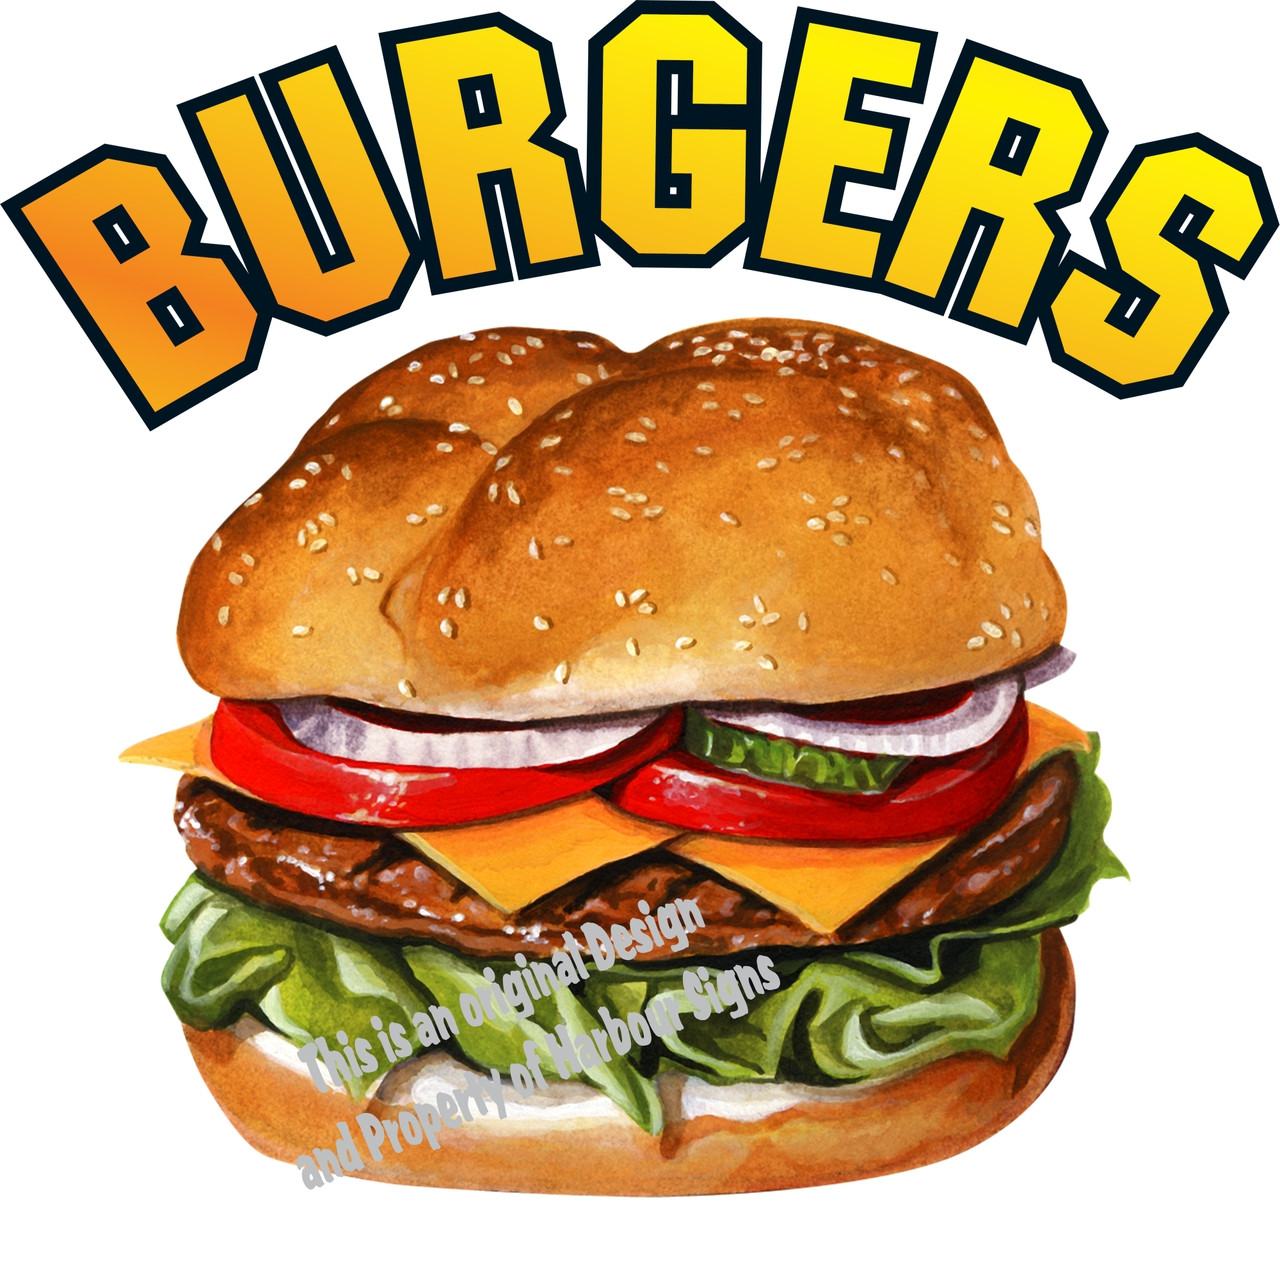 Burgers DECAL Choose Your Size & Color Concession Food Truck Sticker M 